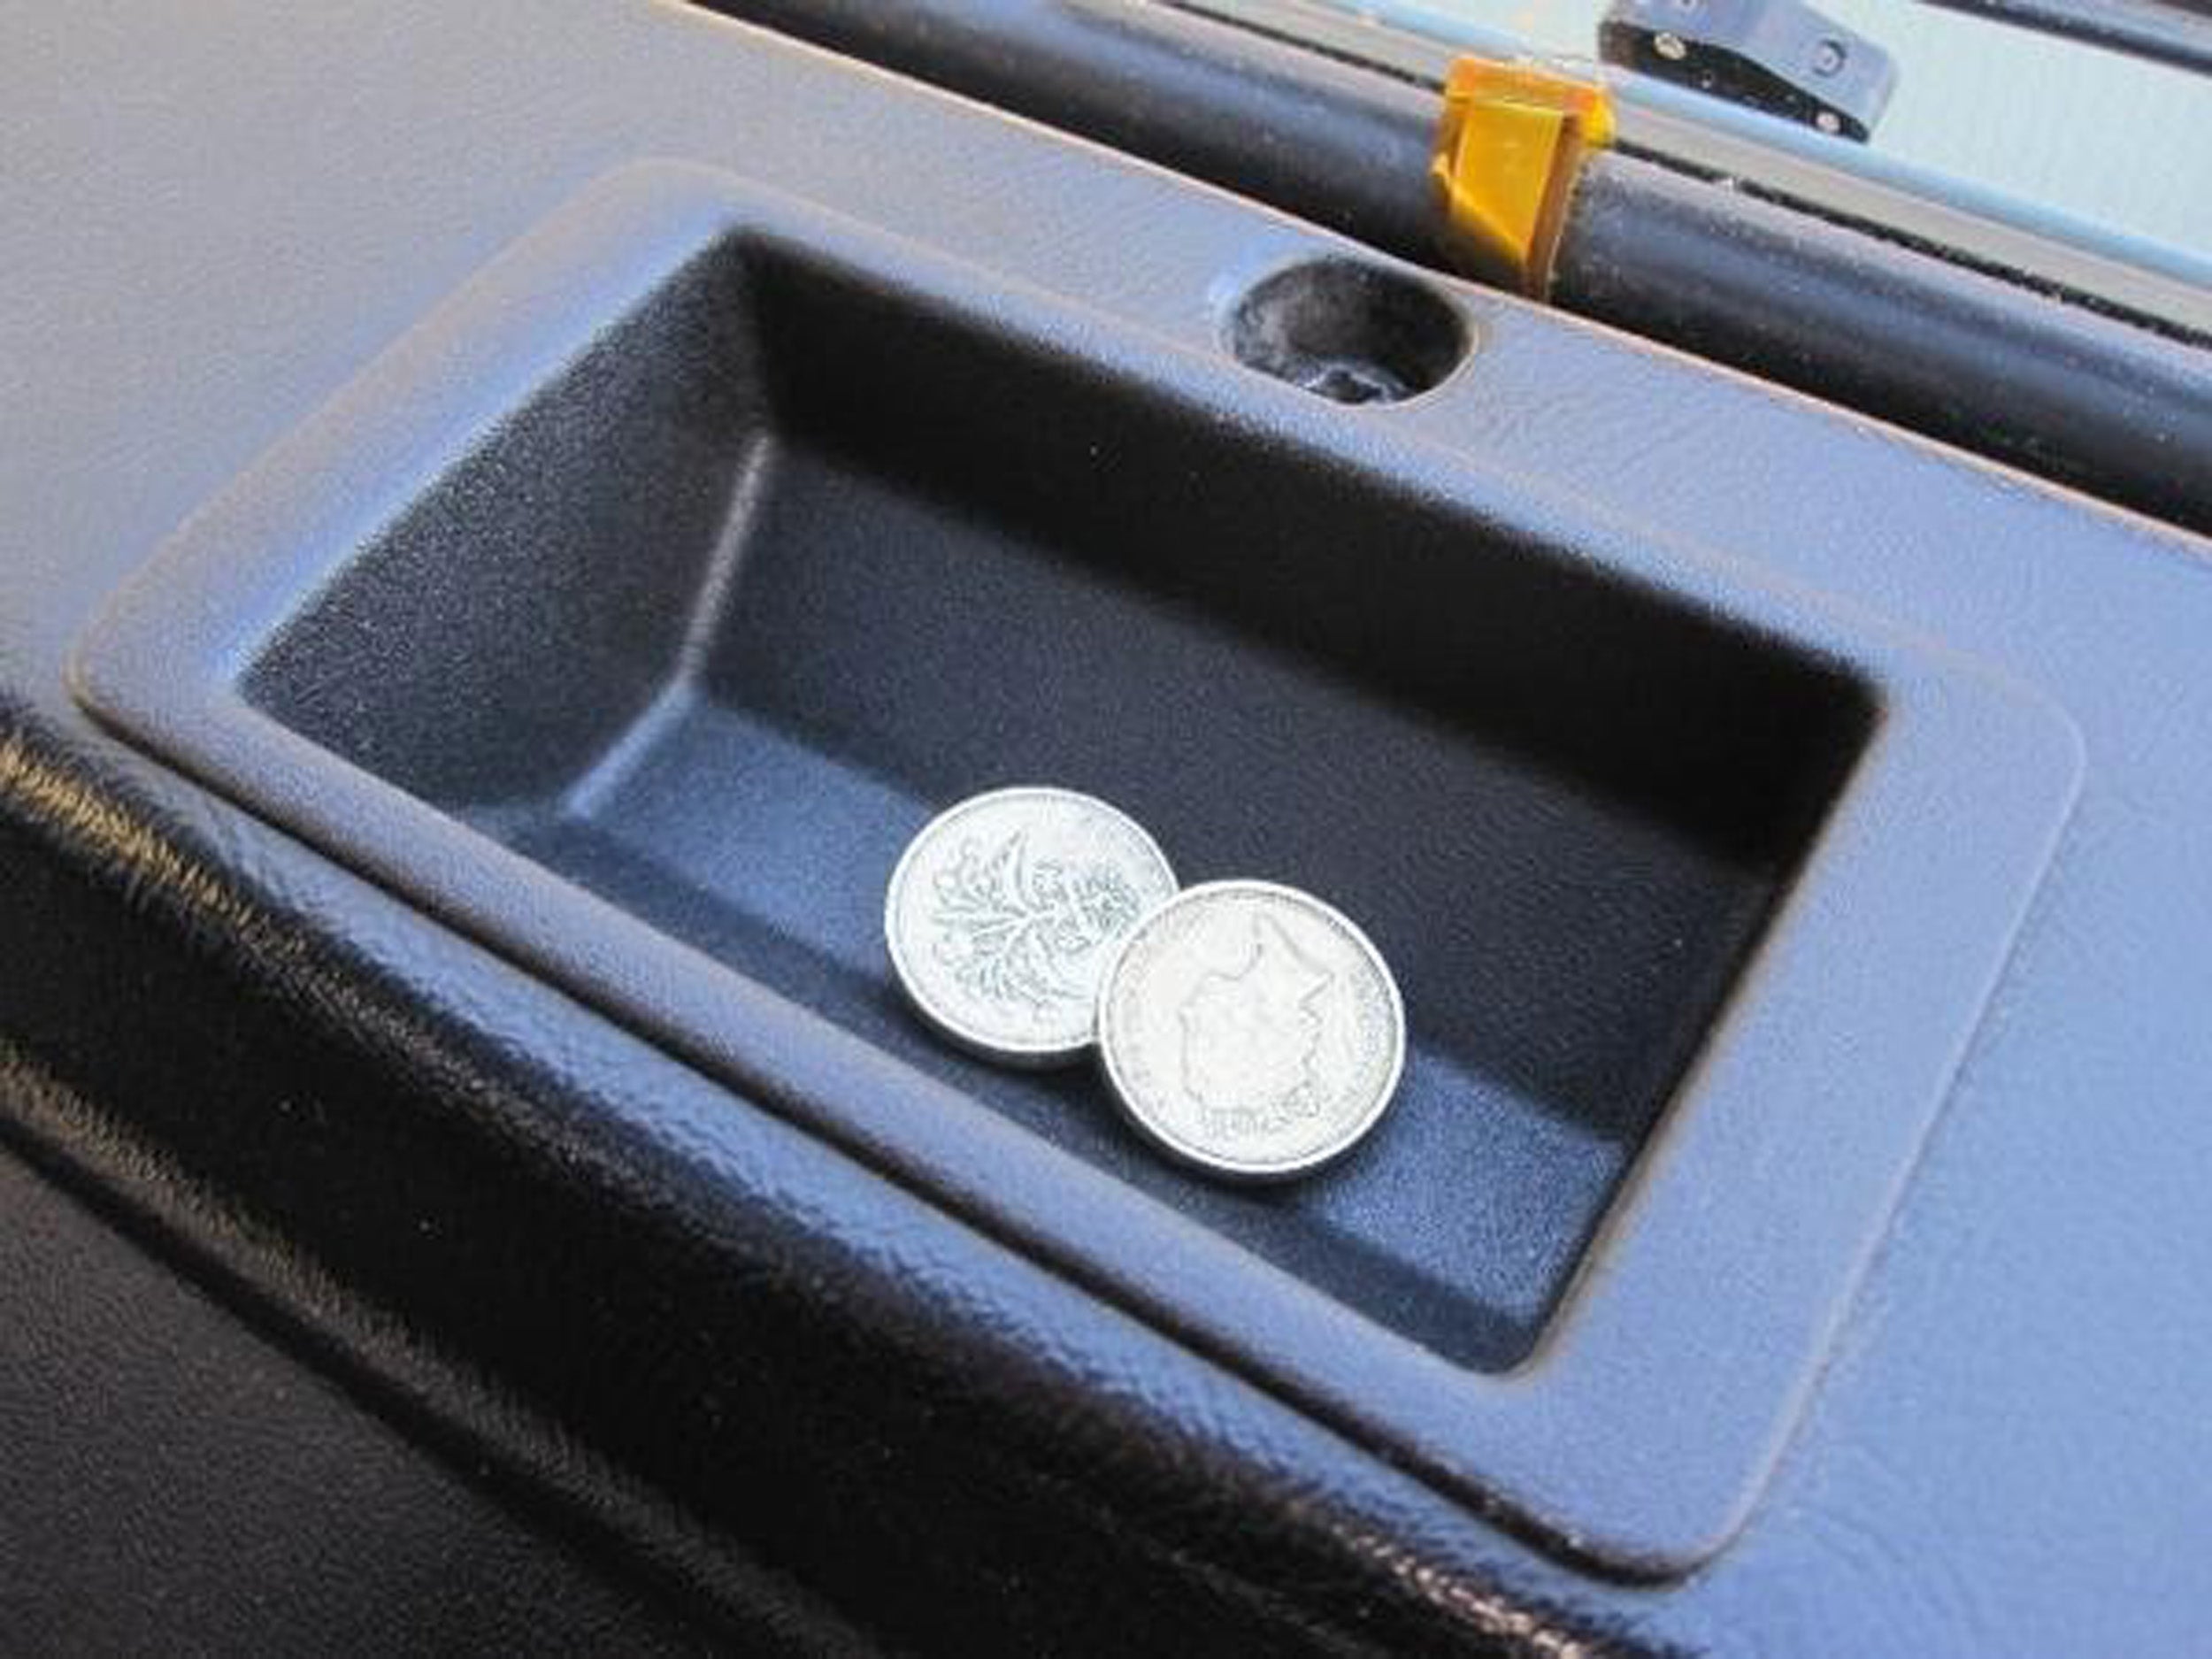 Defender Dashboard Coin Tray (replaces factory ash tray) - for Land Rover 90/110/130